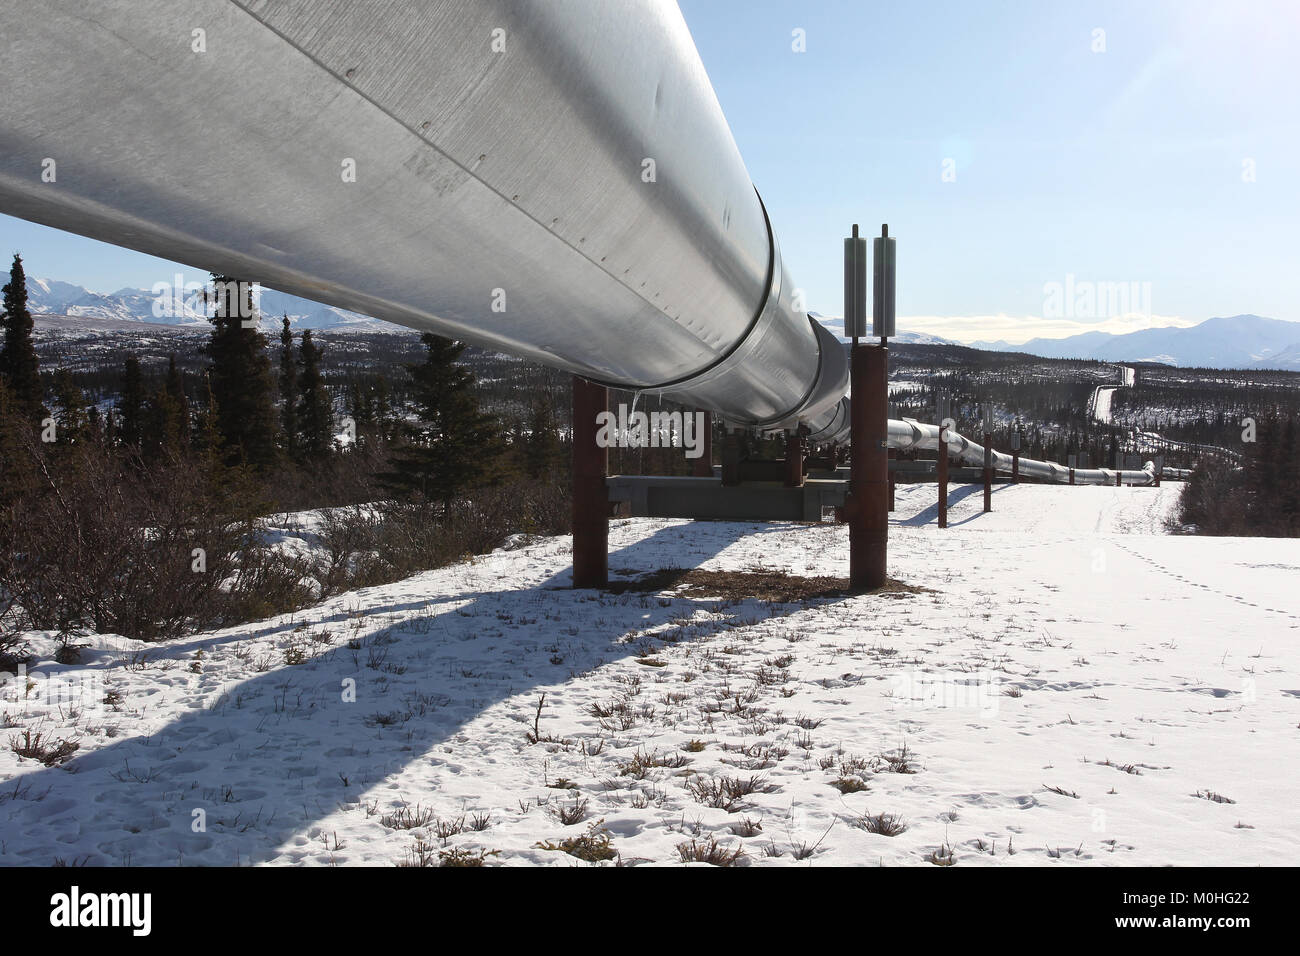 The Trans-Alaska Pipeline System along the Richardson Highway in Alaska. the pipeline moves crude oil from Prudhoe Bay to Valdez. Stock Photo